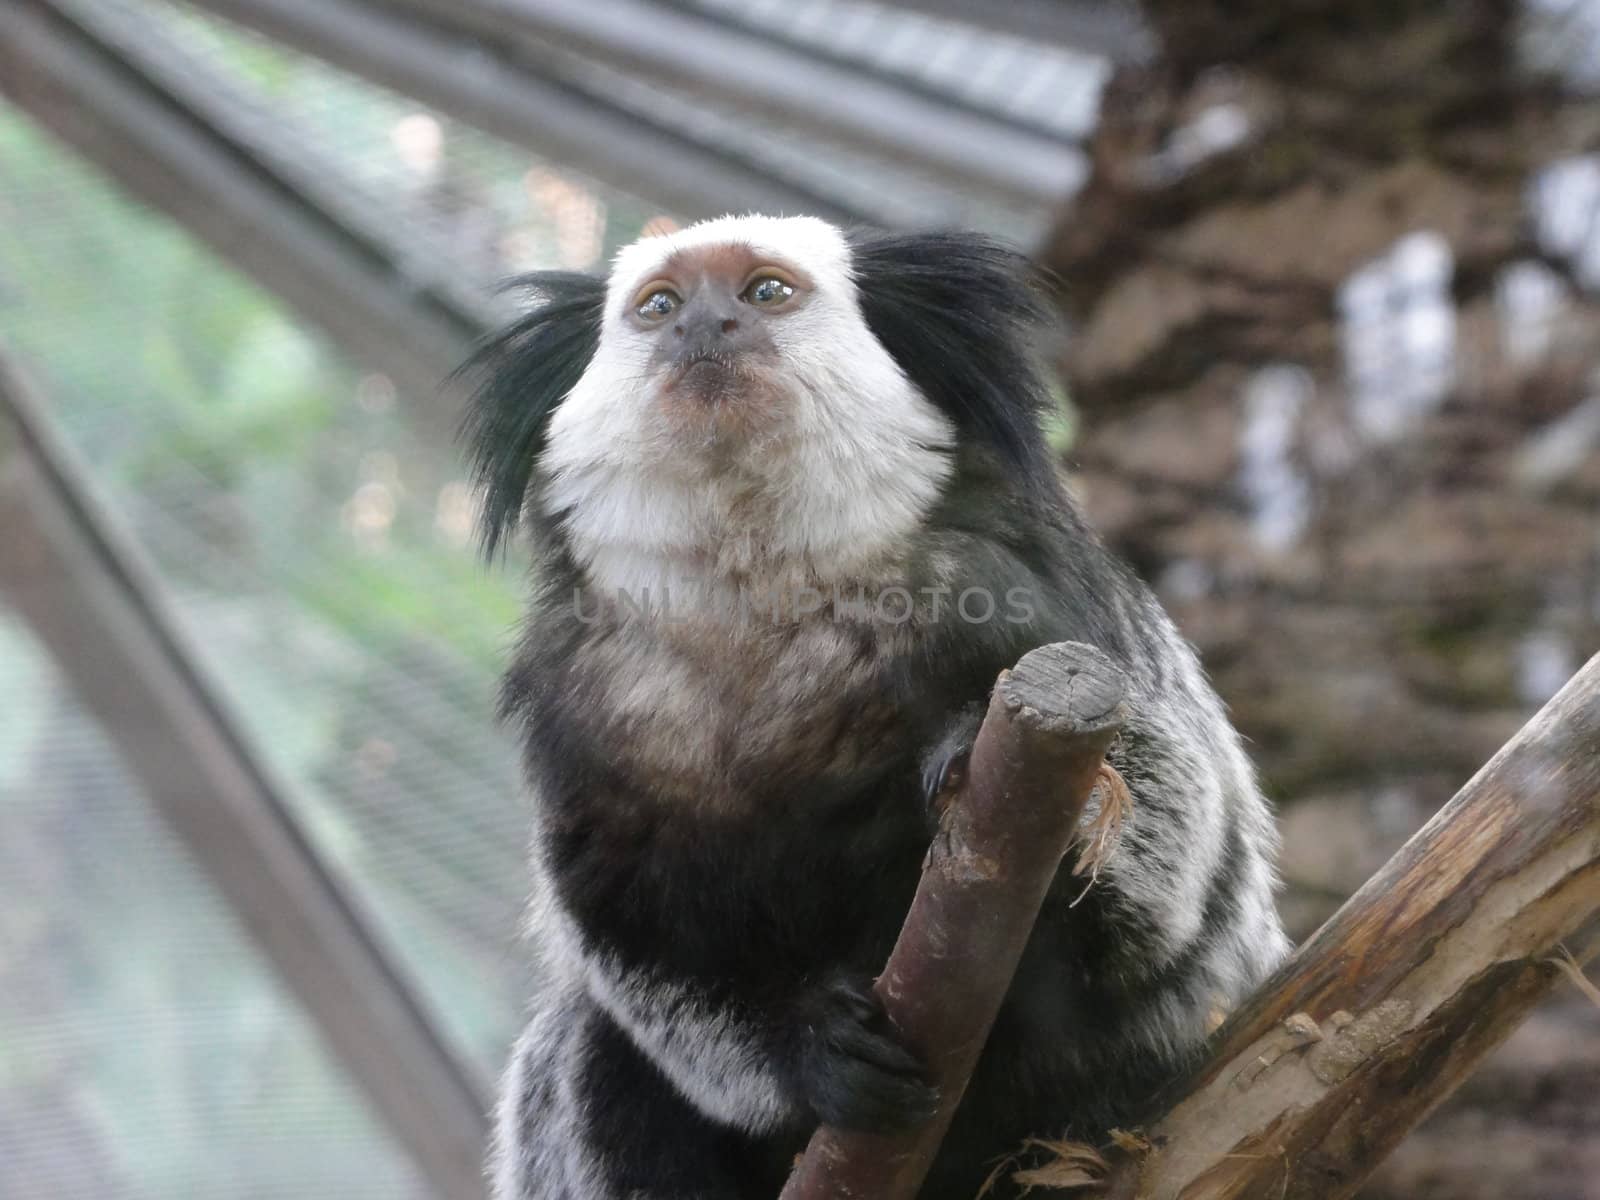 Photo of a Marmoset in a zoo